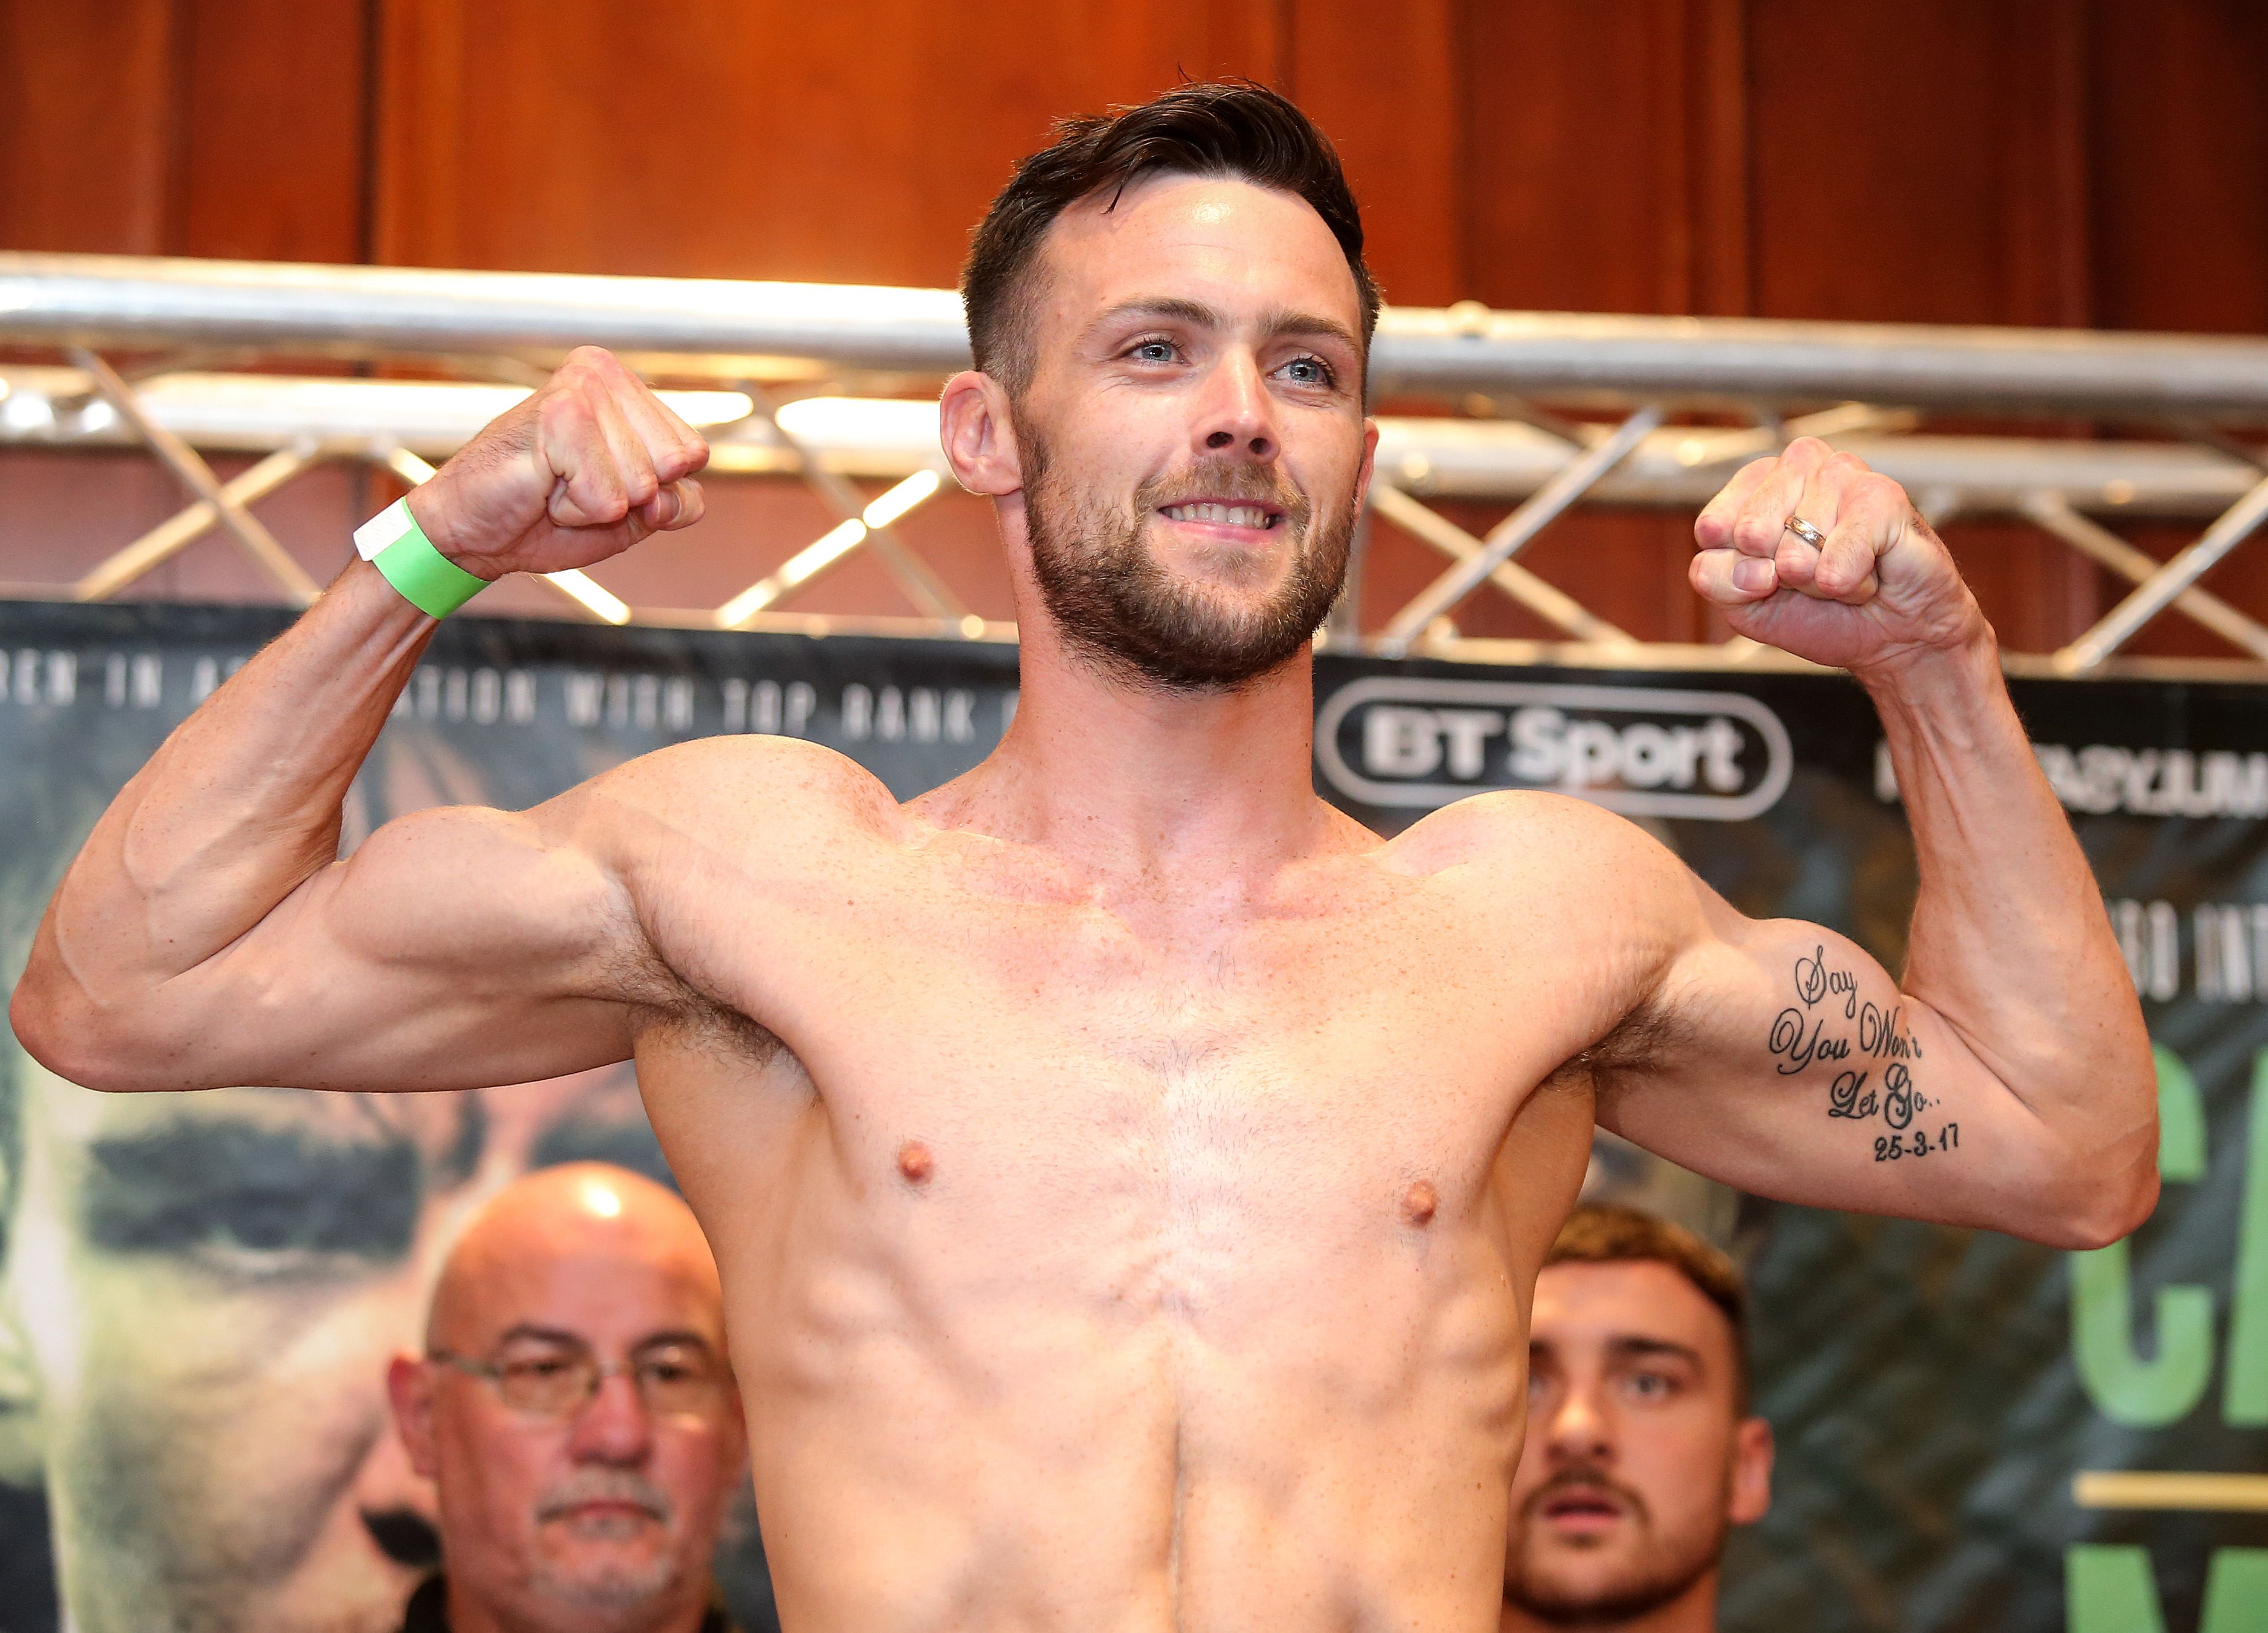 West Belfast boxer Padraig McCrory will challenge Russian Sergei Gorokhov for the WBC International Silver super-middleweight title at the Féile boxing night in the Falls Park on Friday, August 6 